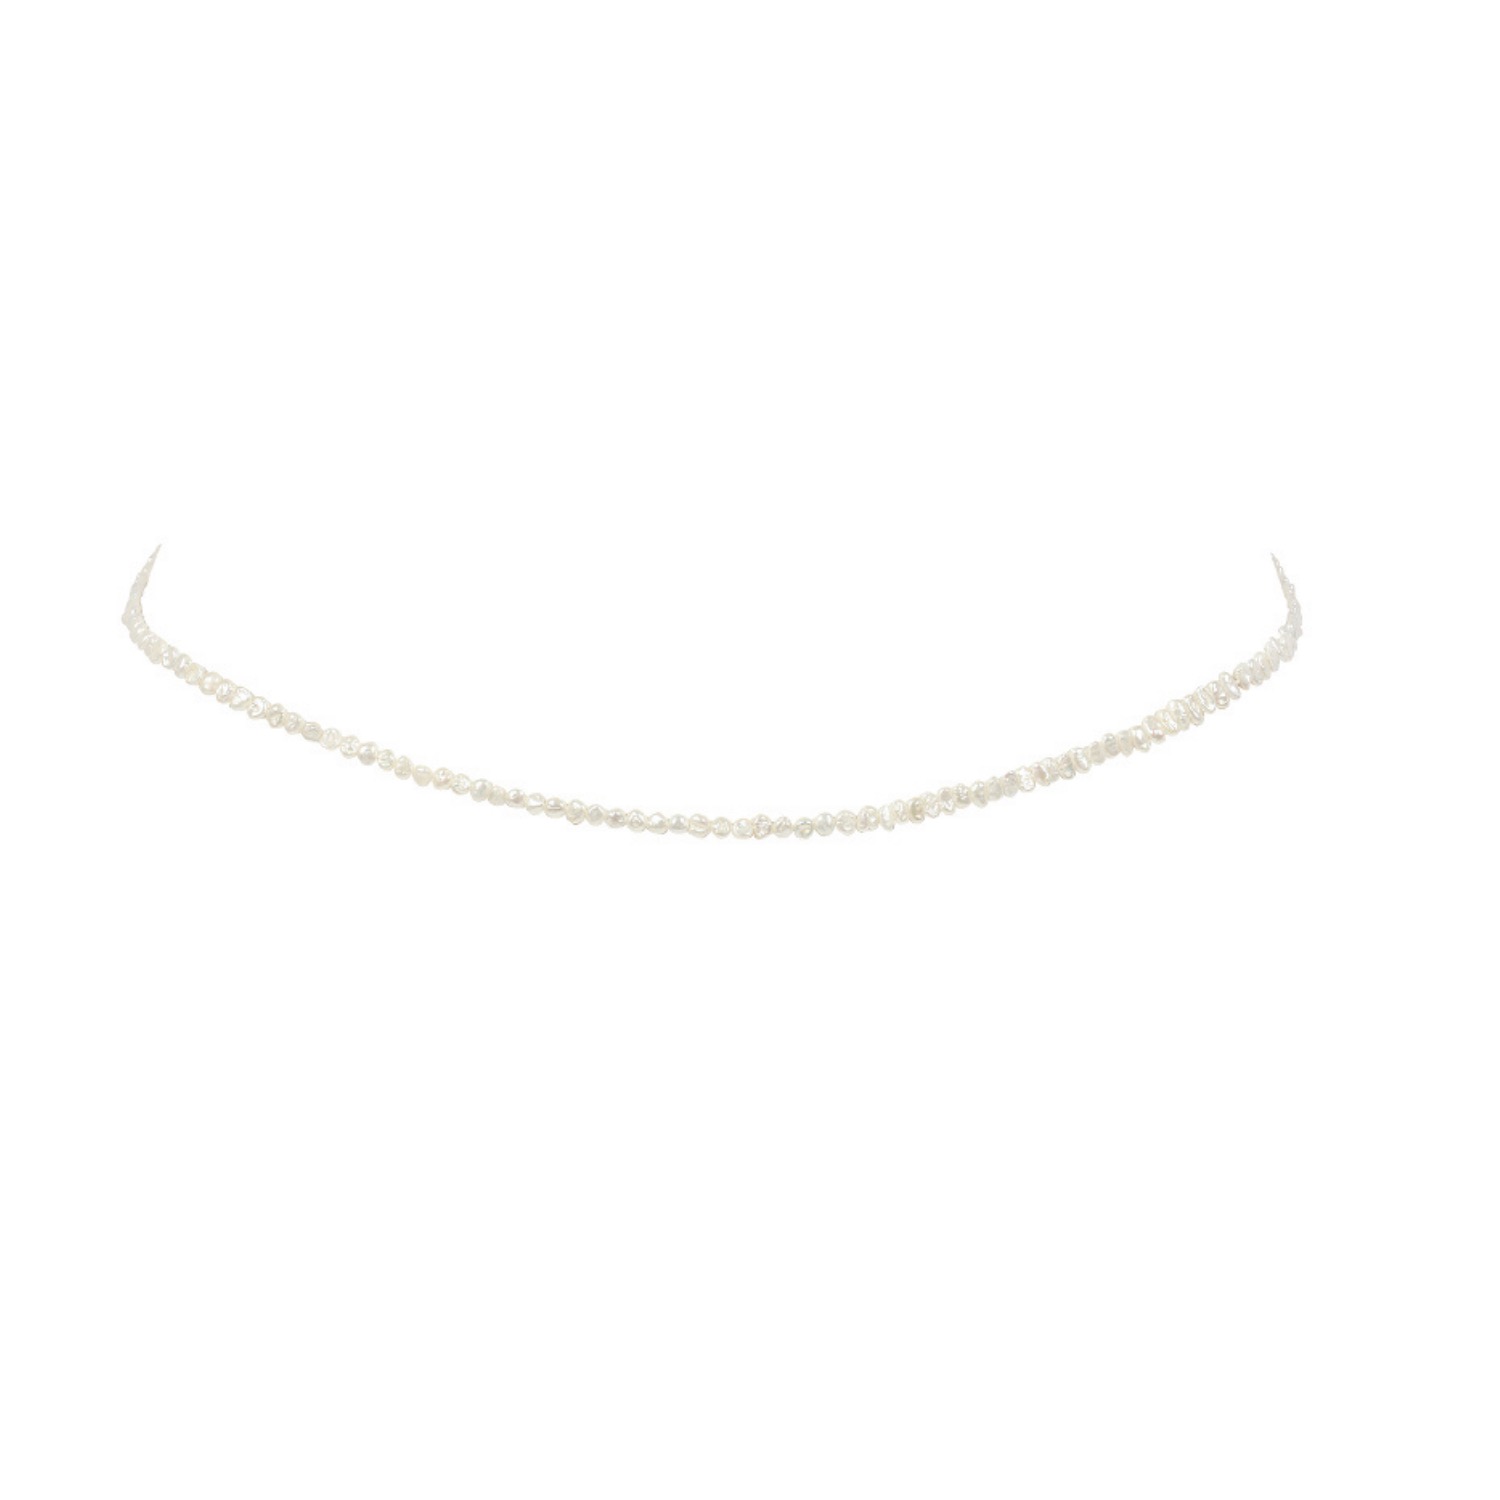 Naiia Women's Gold Chloe Pearl Multiwear Belly Chain And Necklace